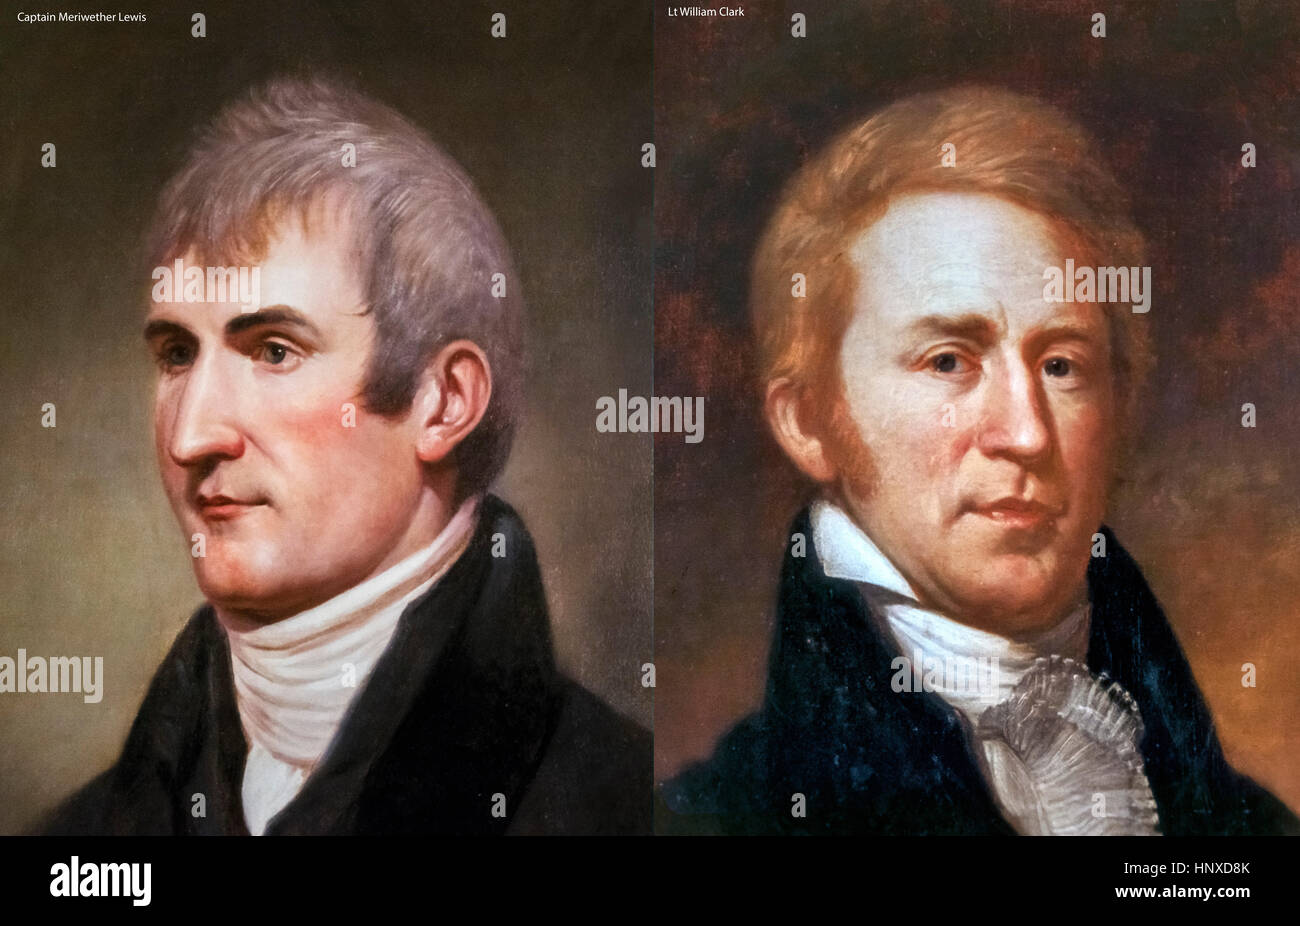 Lewis and Clark. Captain Meriwether Lewis and Lt William Clark, famous for the Lewis and Clark Expedition in 1804.  Photoreproductions of portraits by Charles Willson Peale, c.1807 and 1810 Stock Photo